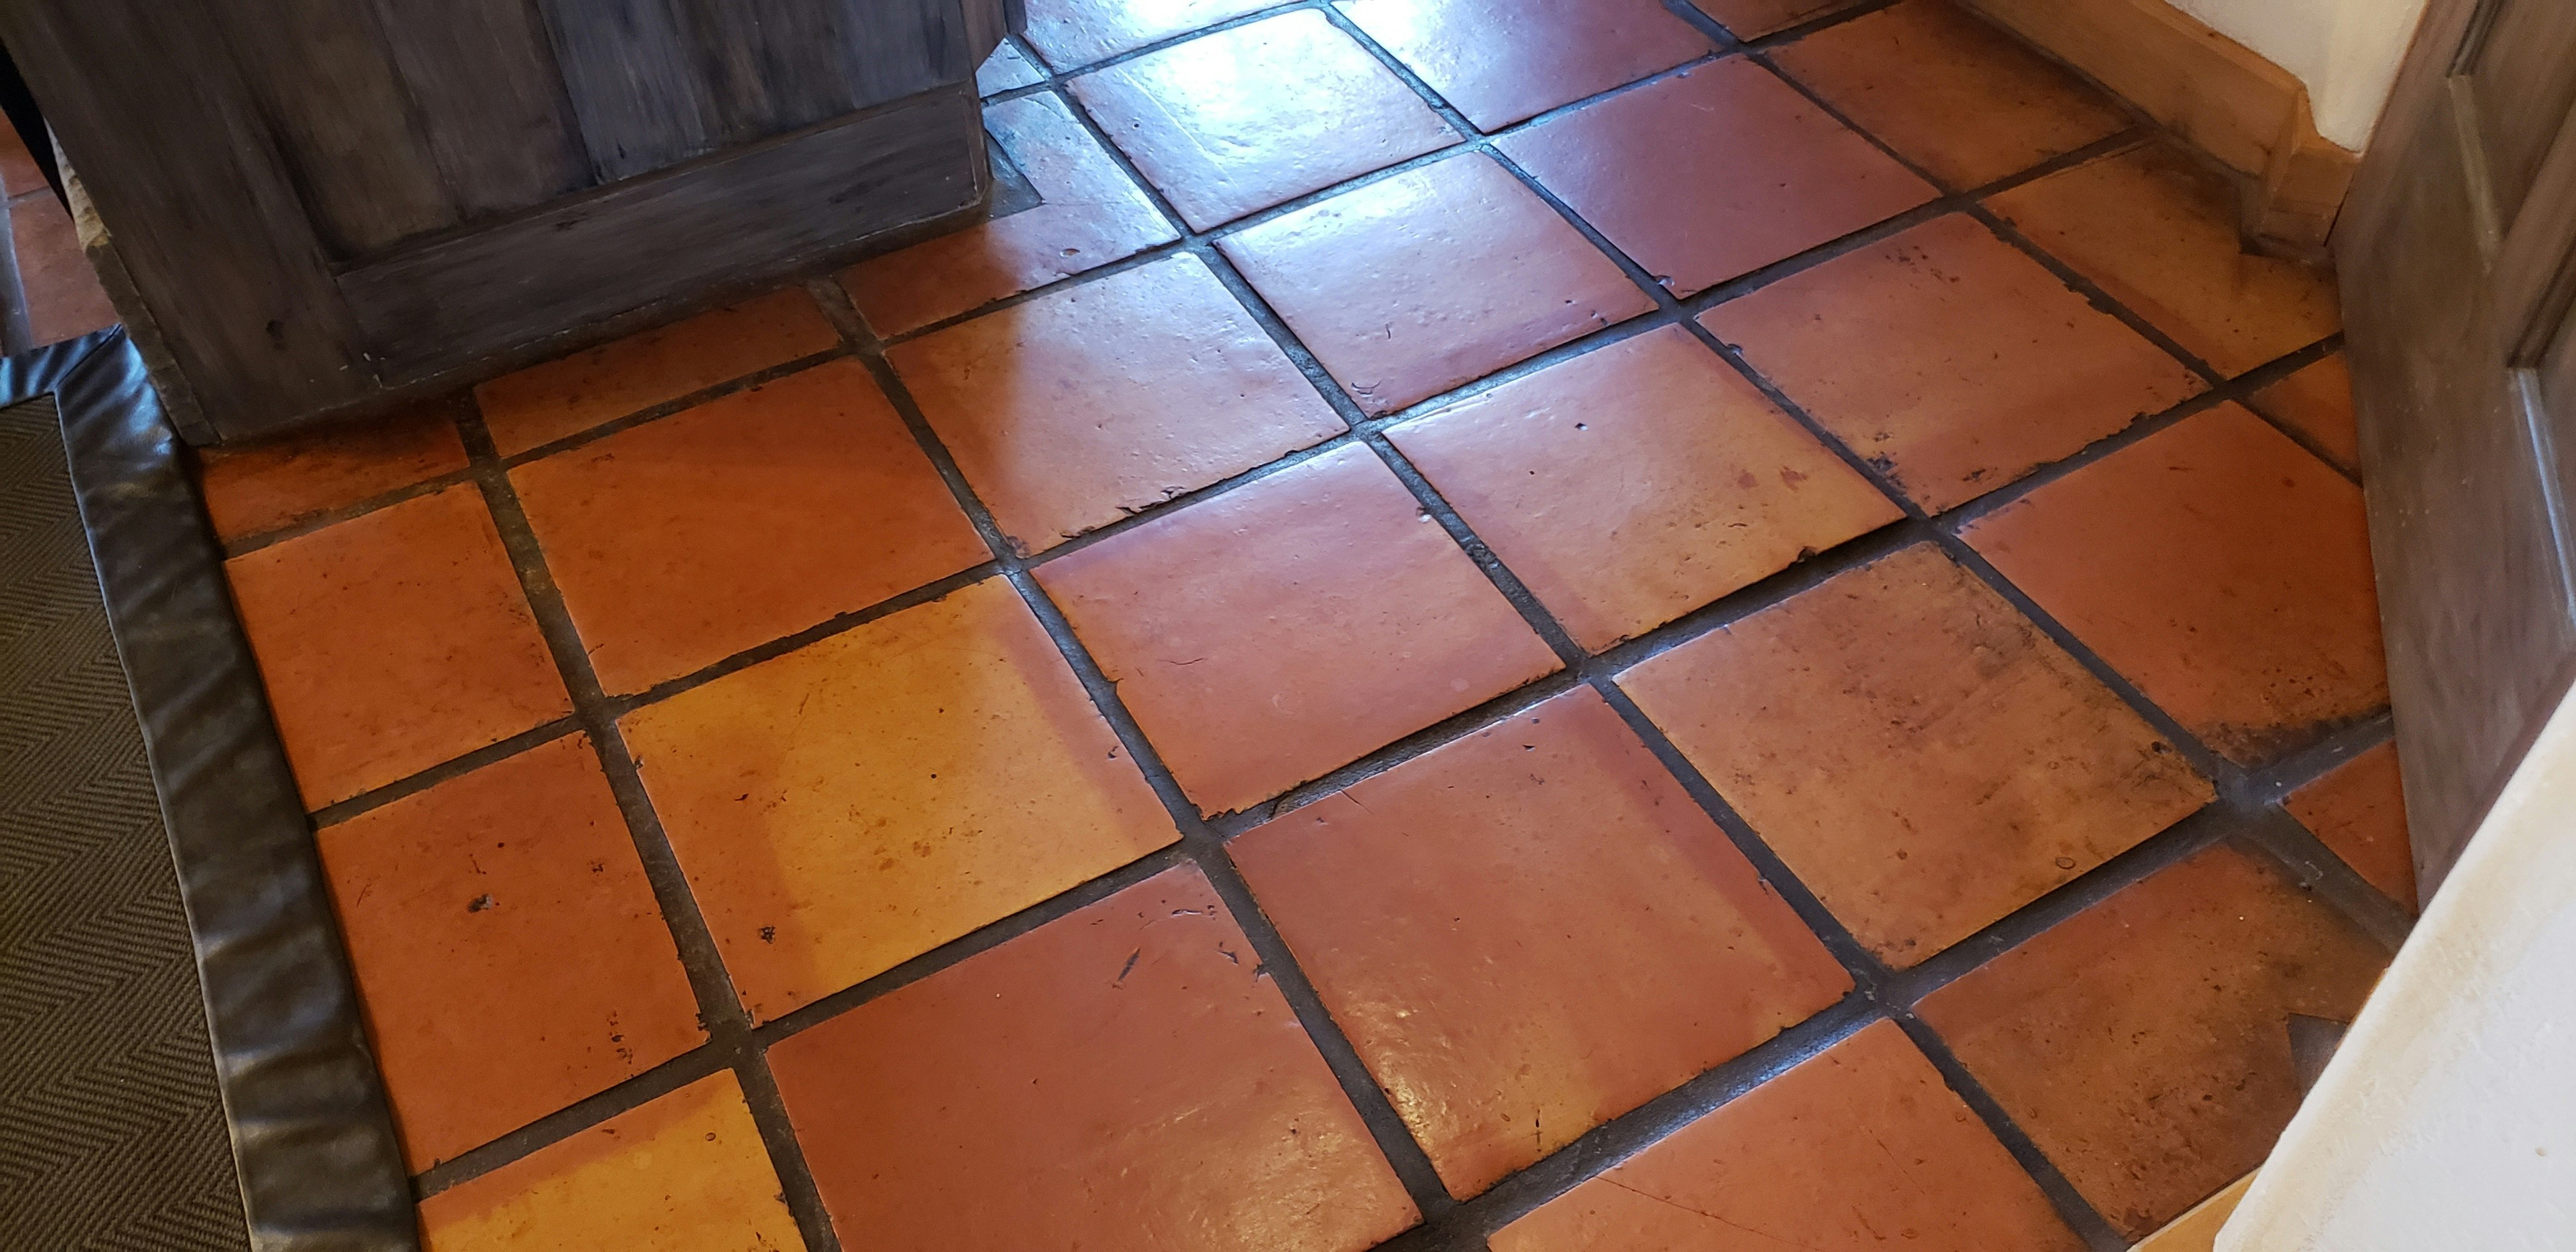 These reddish-orange tiles have radiant heat to keep toes warm all winter long.